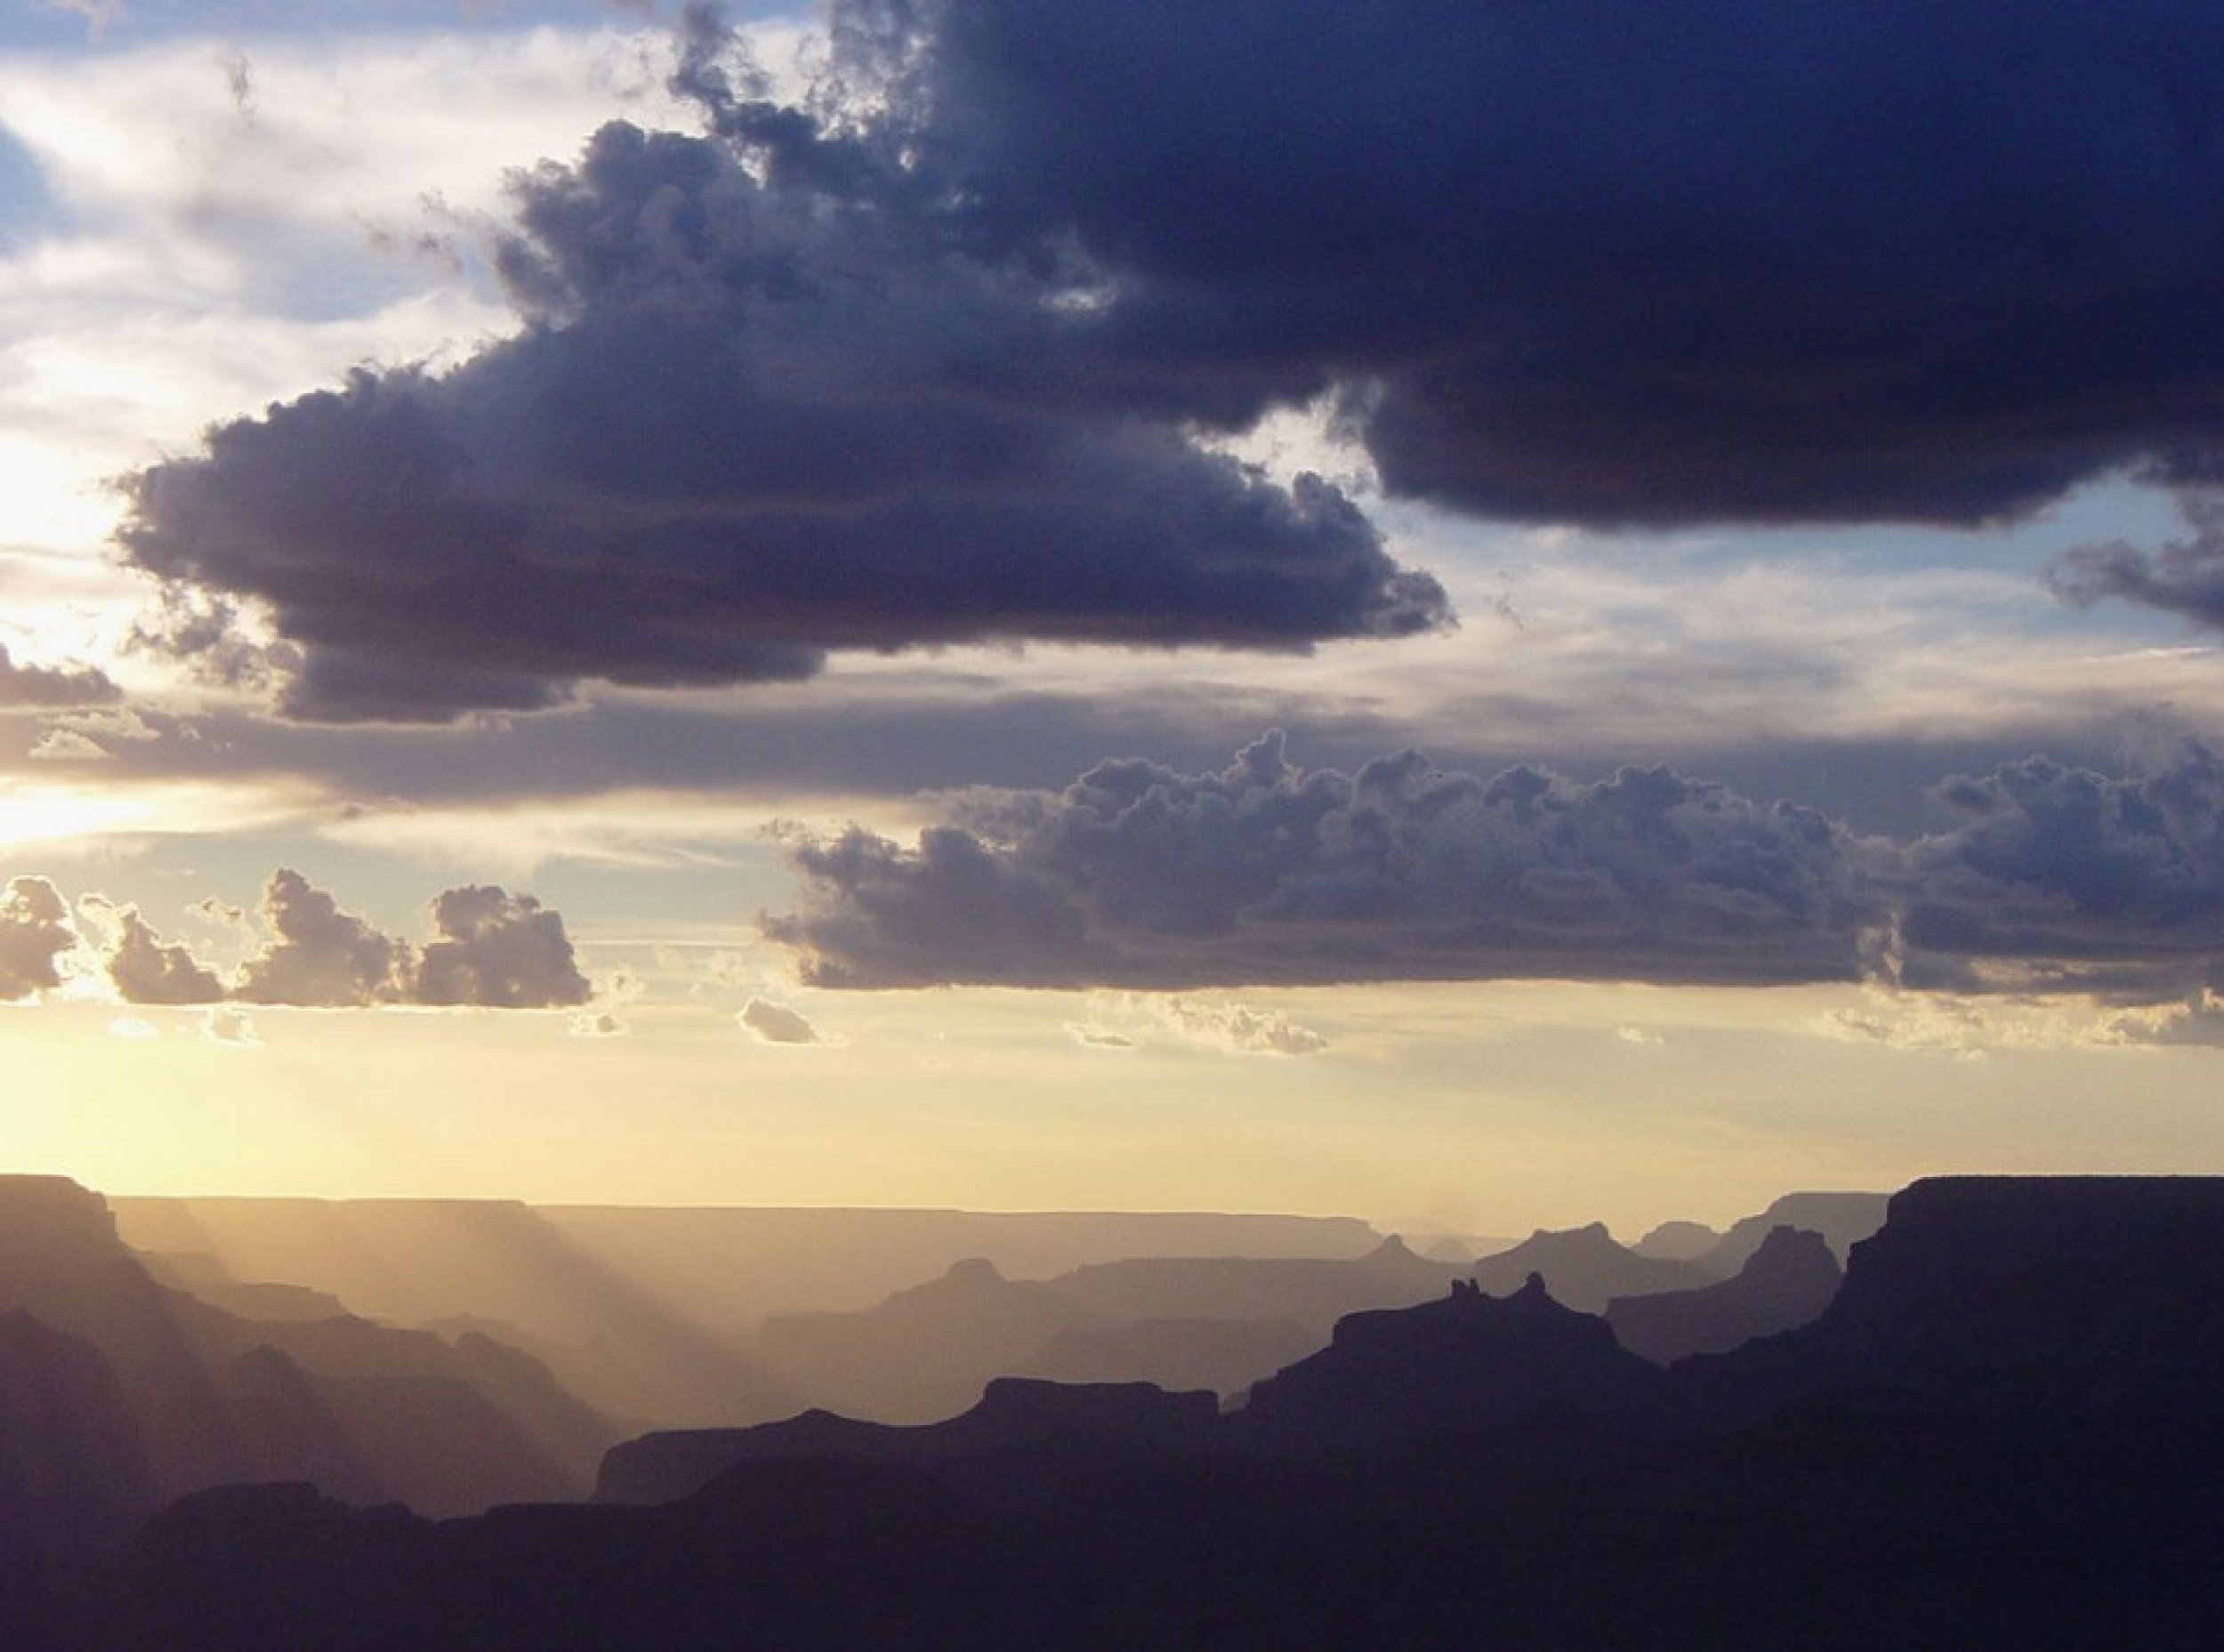 Looking west across grand canyon at the sunset from desert view point